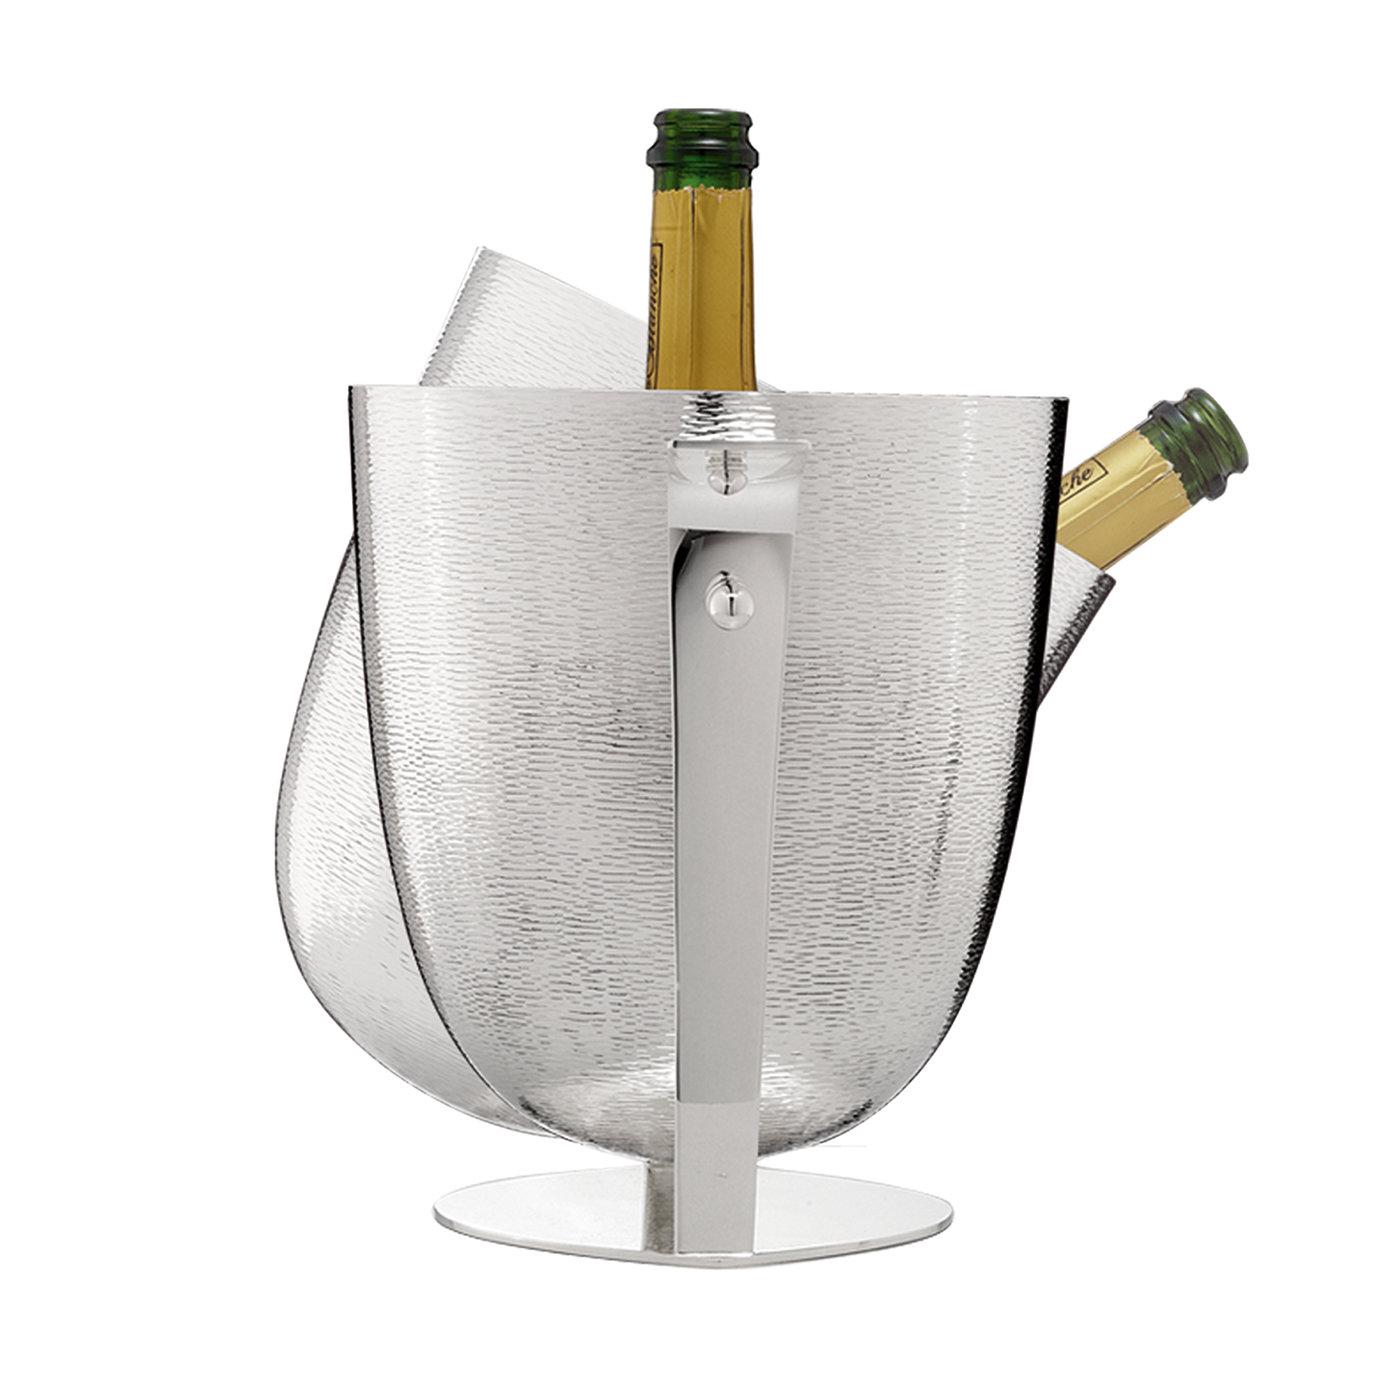 Superior champagne bucket crafted in a silver-plated alloy. The stunning texture on the exterior makes this piece a joy to look at.